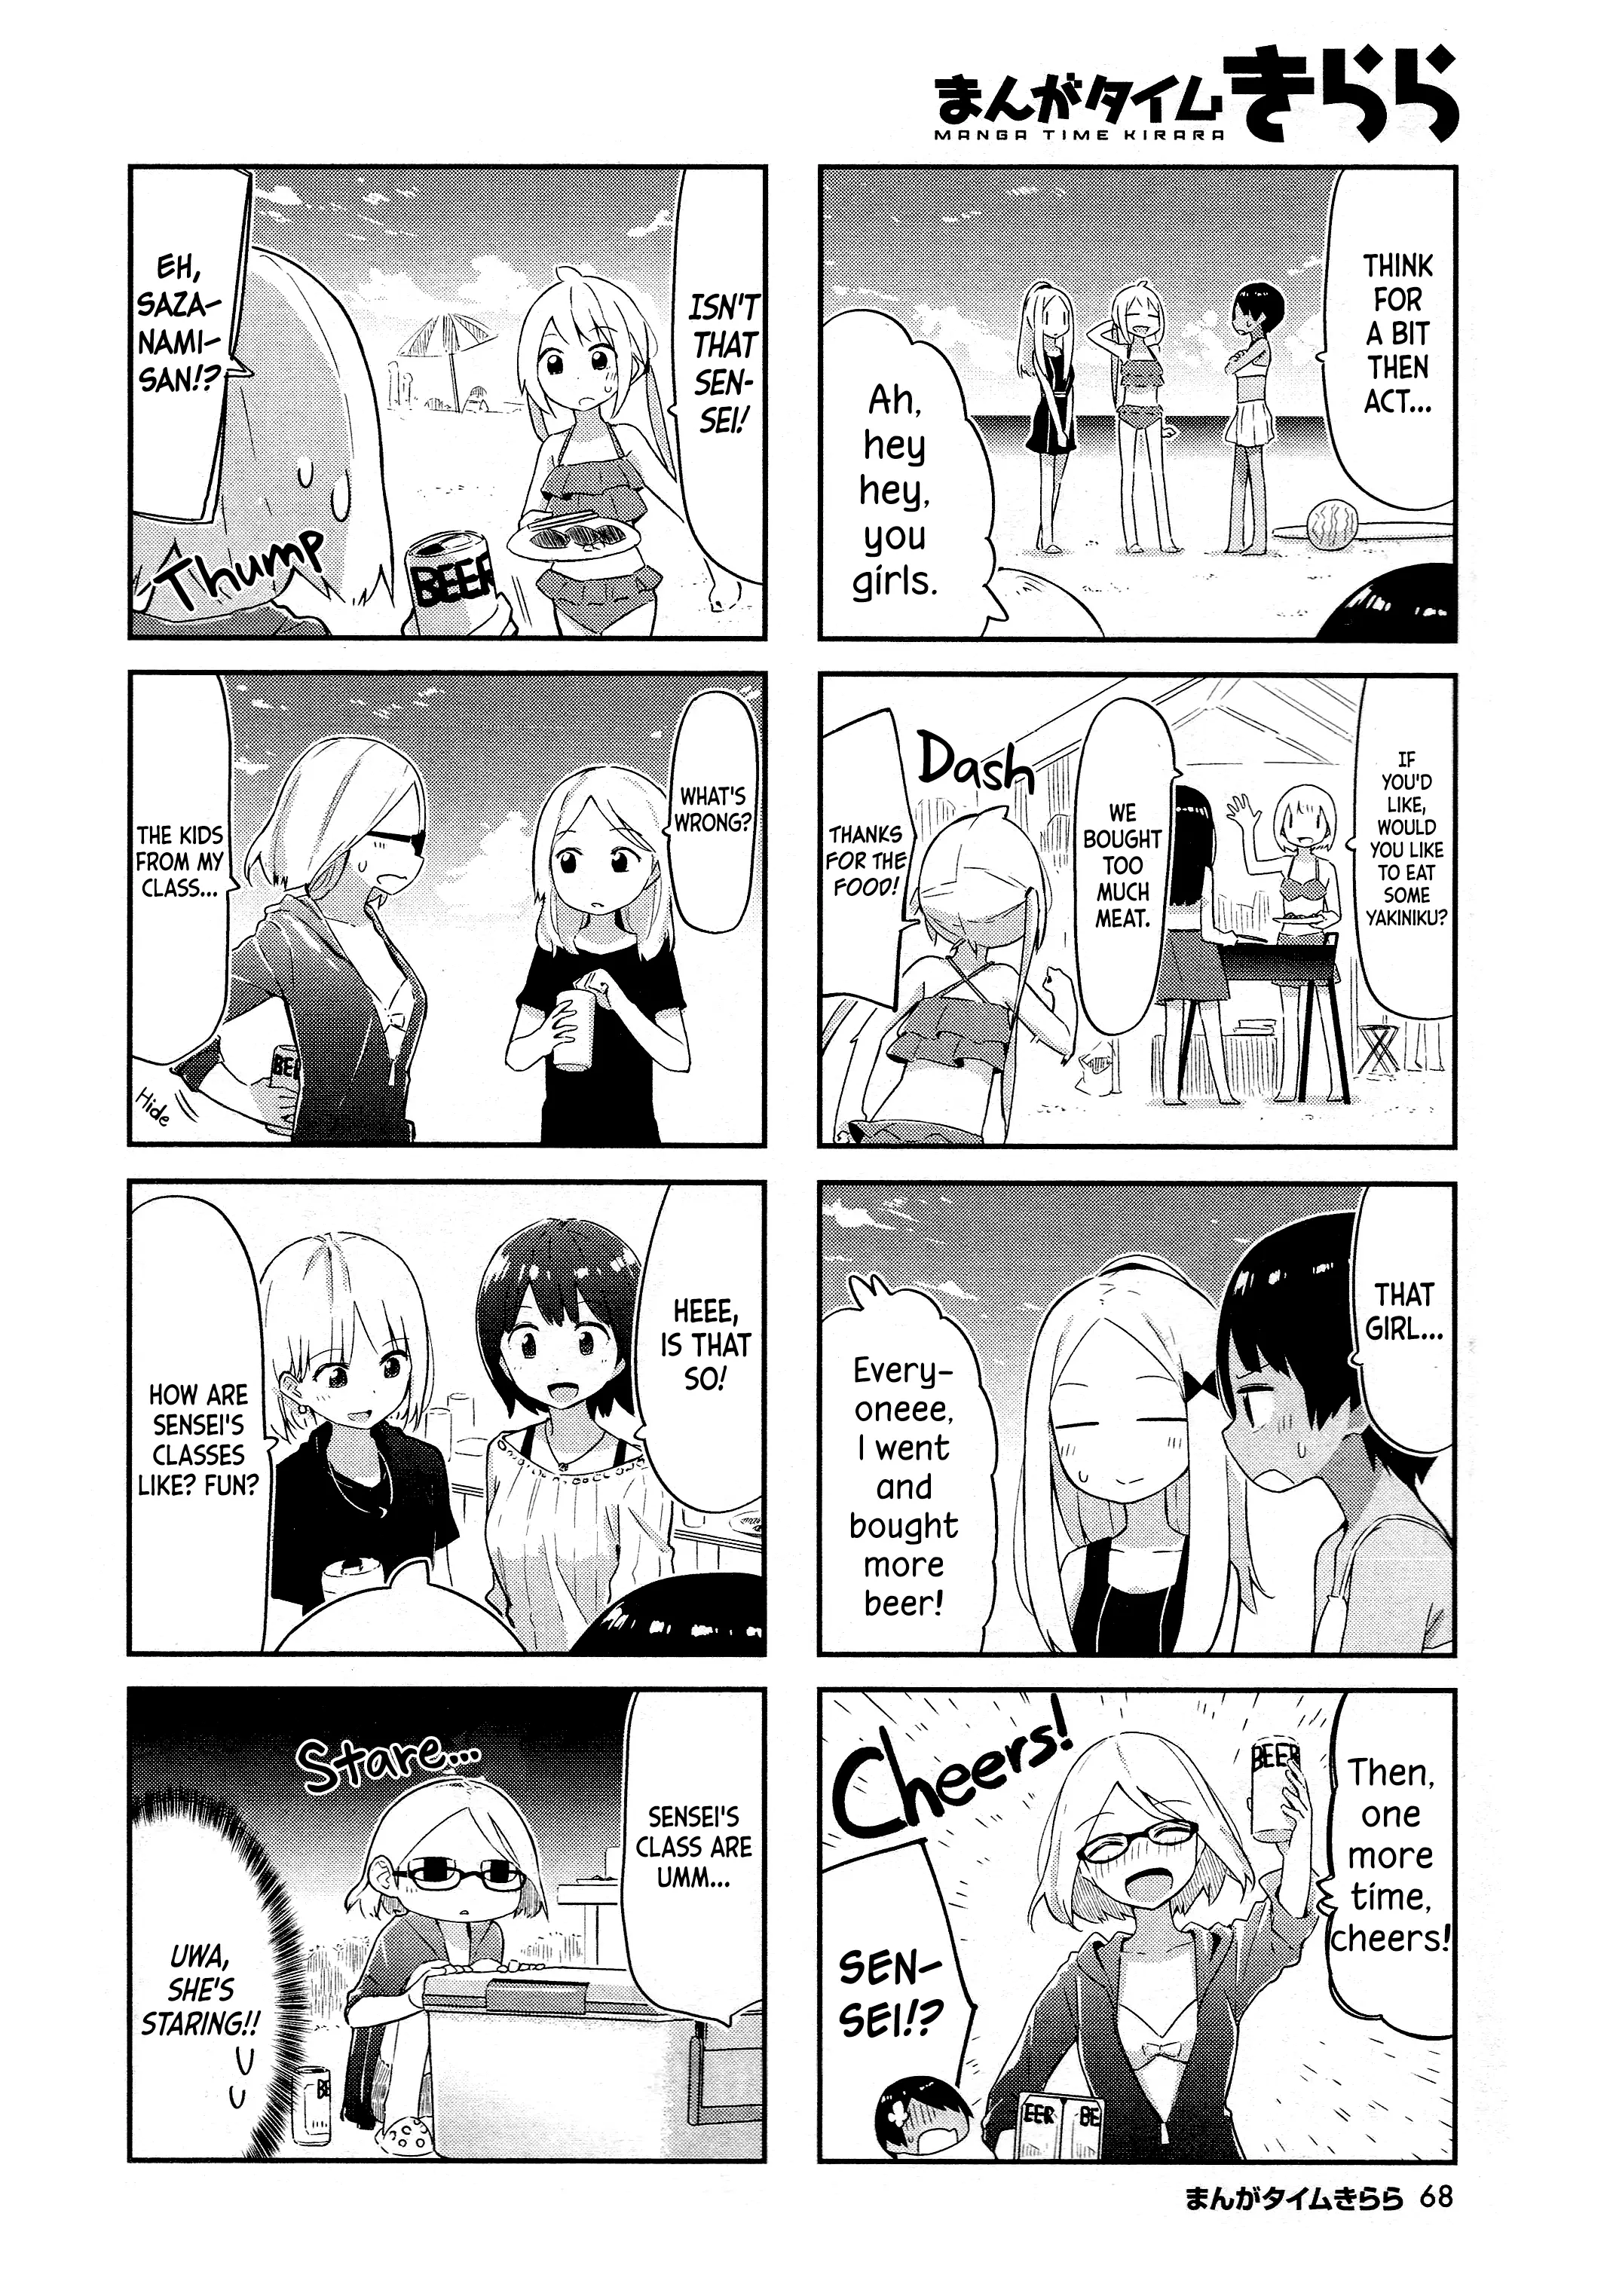 Umiiro March - 9 page 5